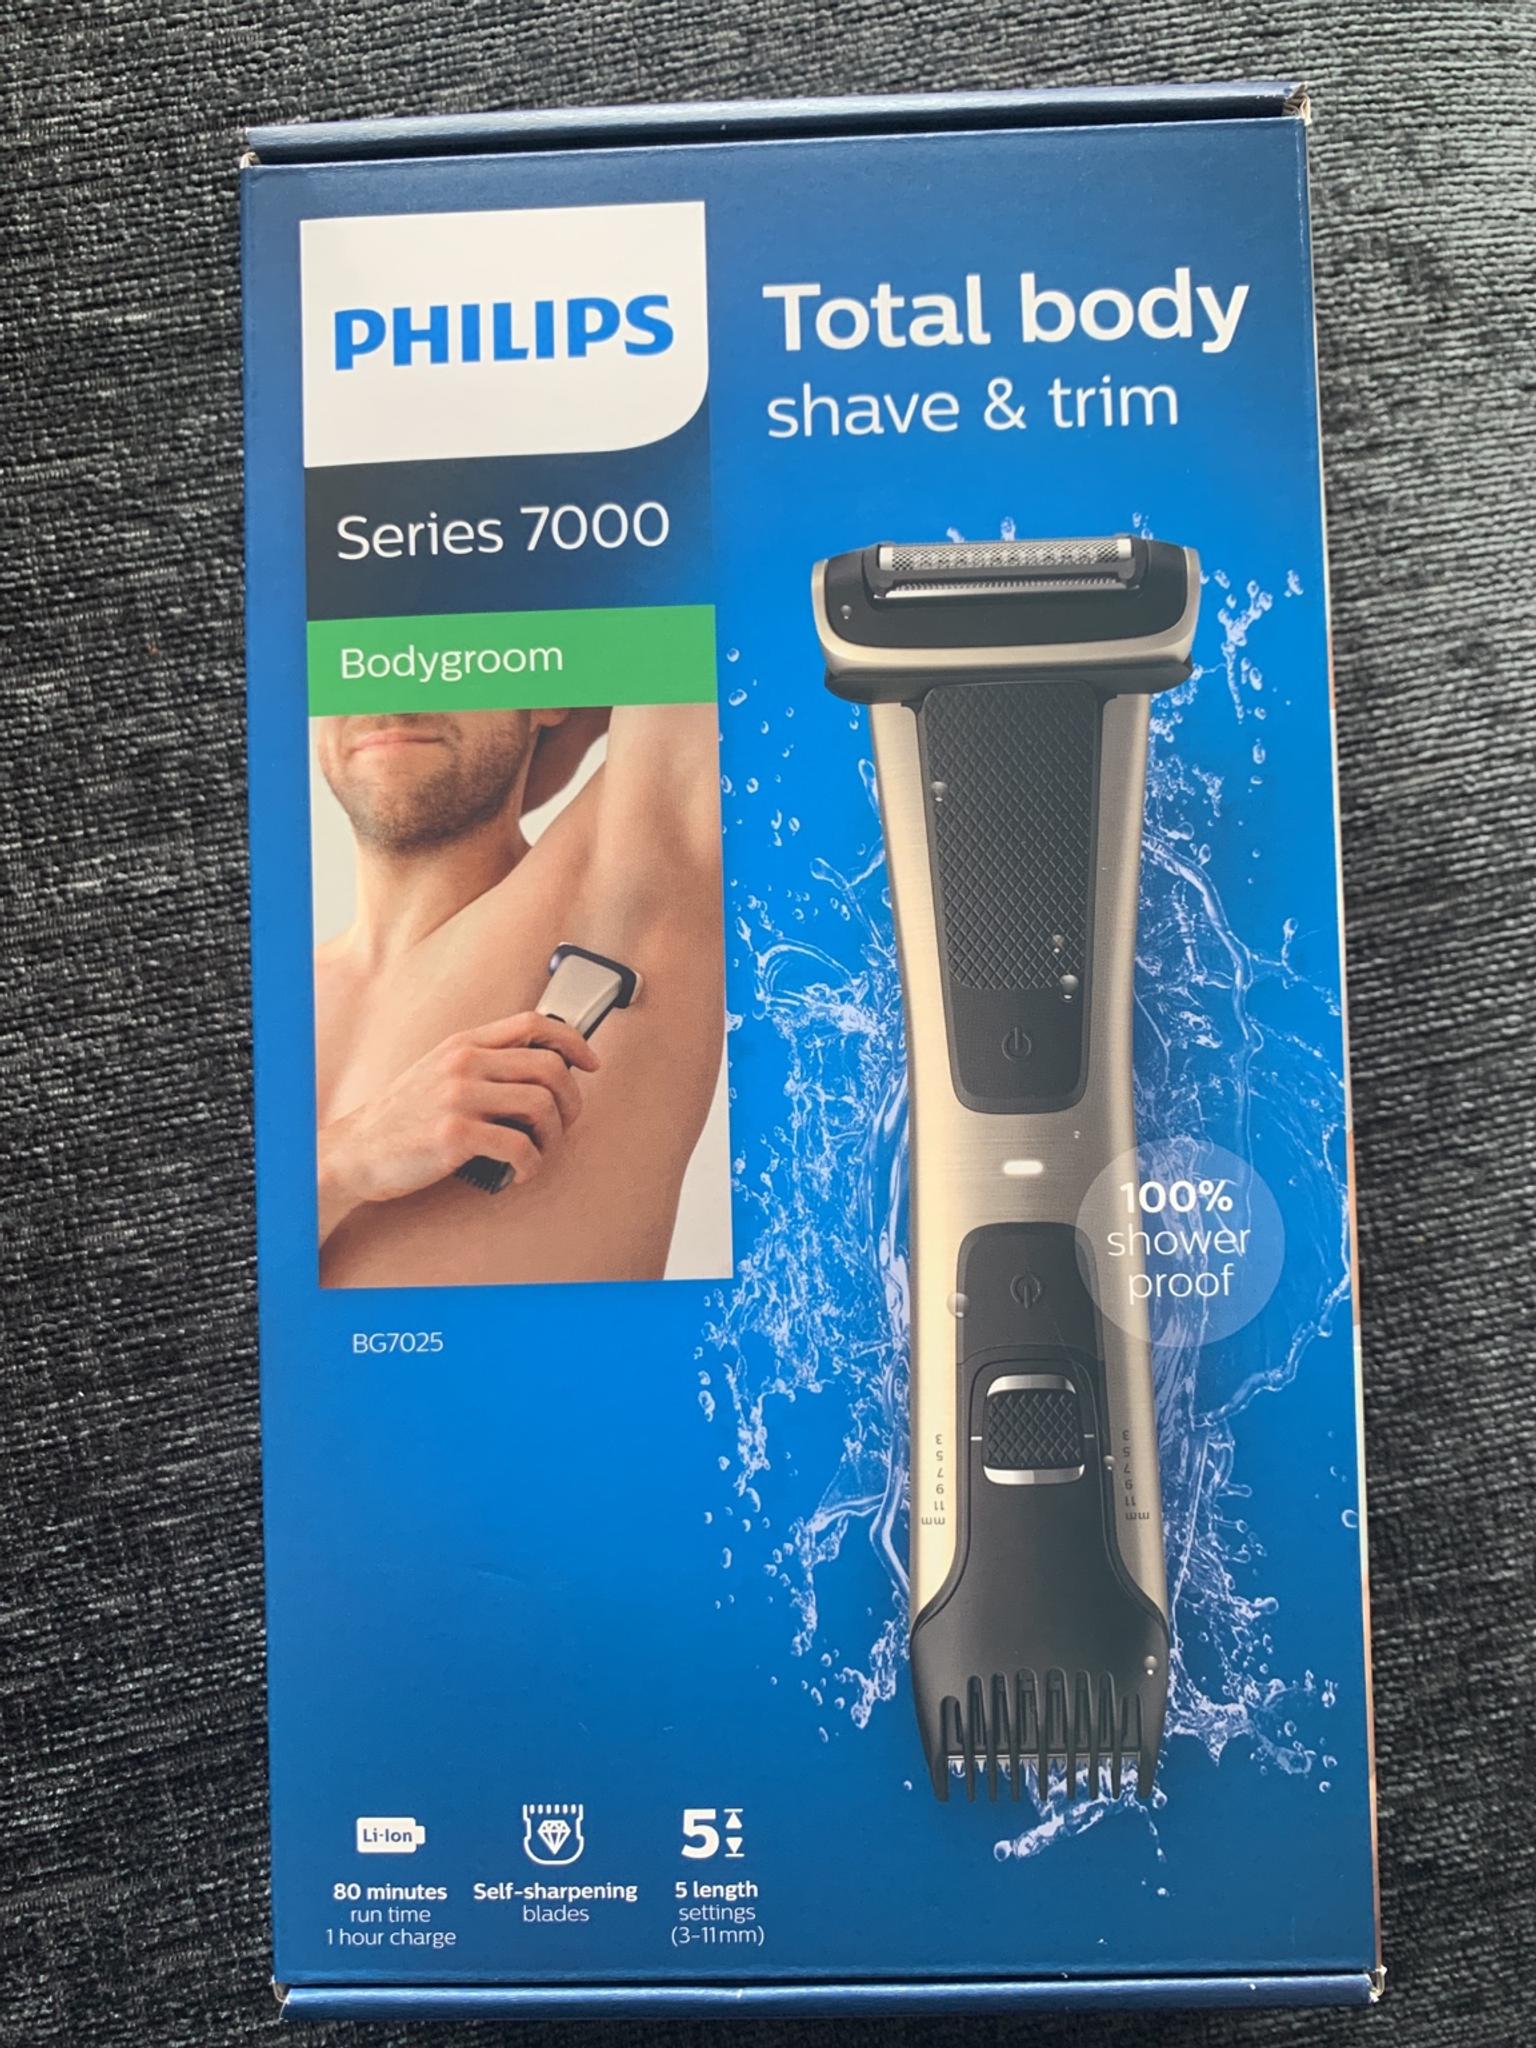 philips series 7000 total body